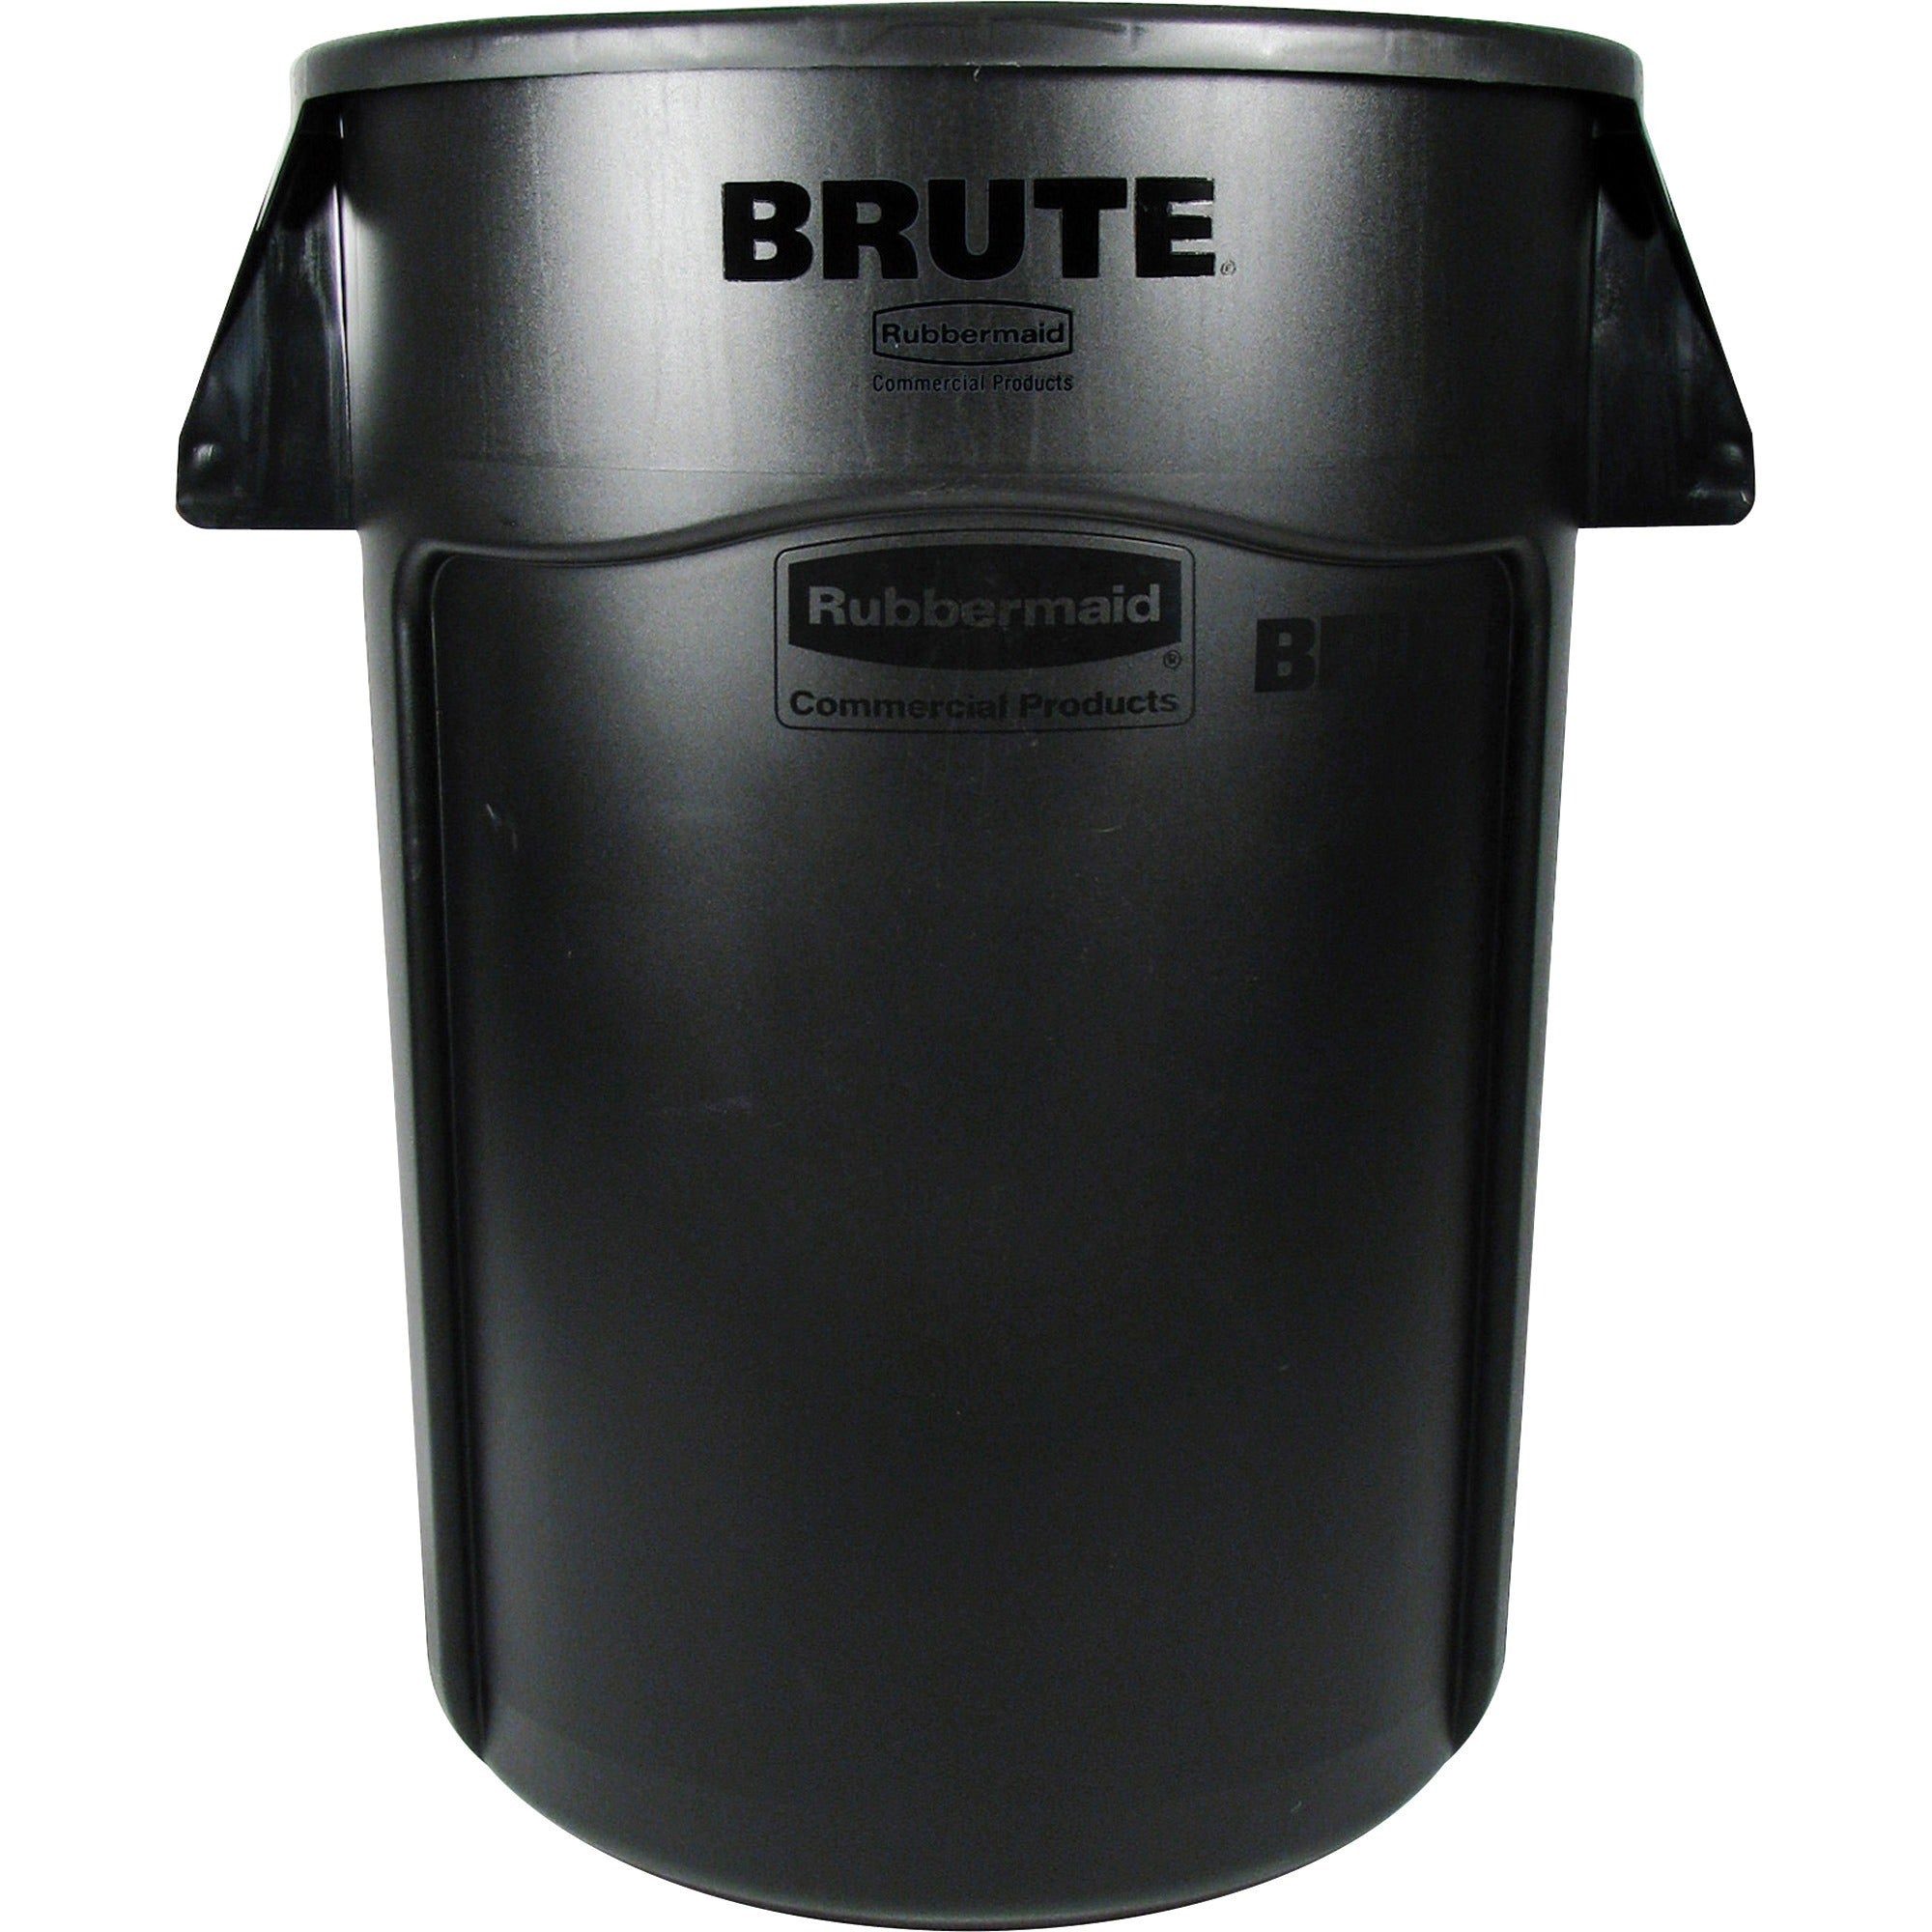 rubbermaid-commercial-brute-44-gallon-vented-utility-containers-44-gal-capacity-round-handle-heavy-duty-reinforced-uv-coated-damage-resistant-warp-resistant-315-height-x-24-diameter-plastic-black-4-carton_rcp264360bkct - 1